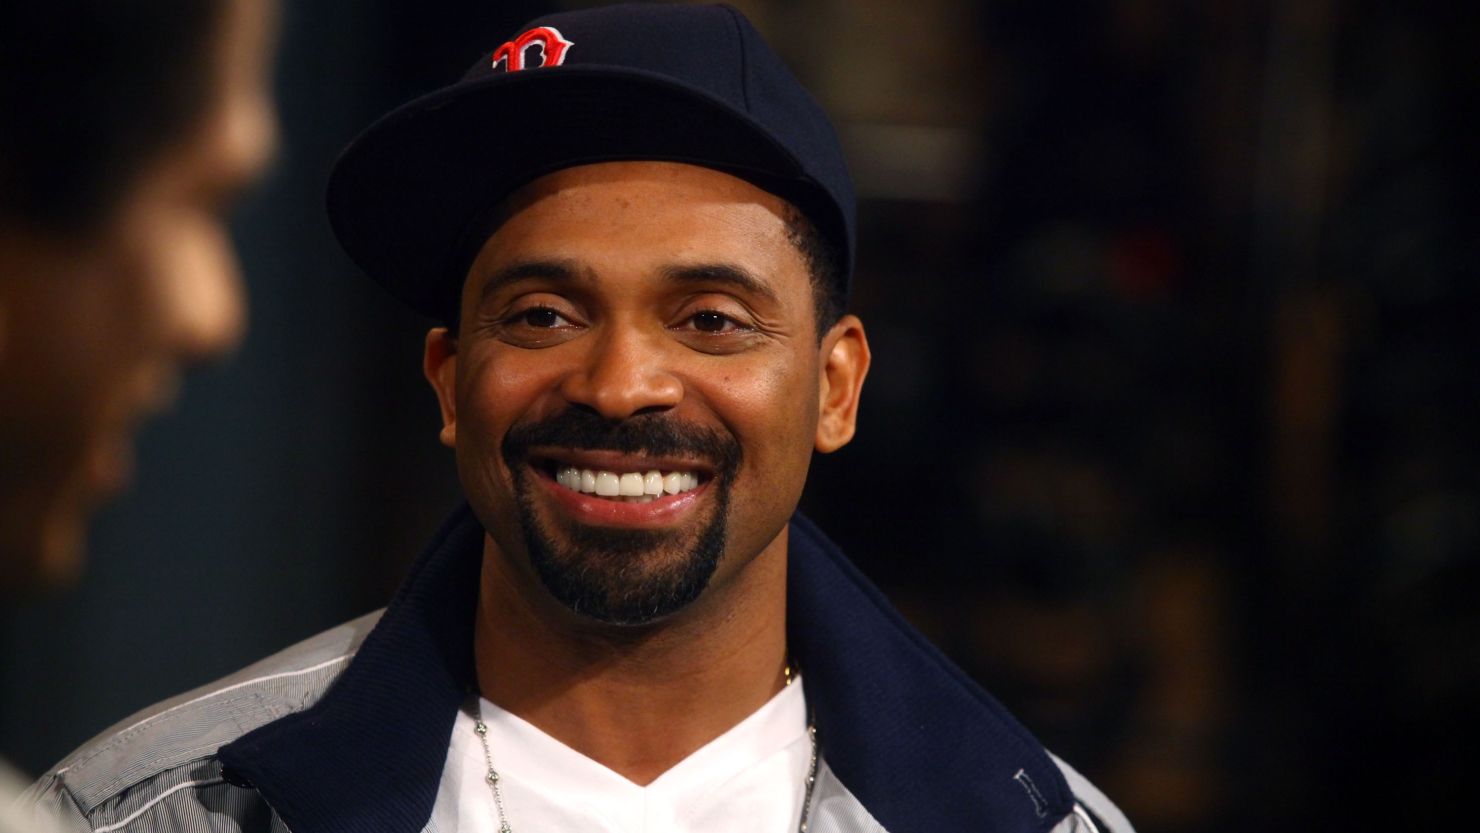 Mike Epps faced criticism over bringing a kangaroo on stage